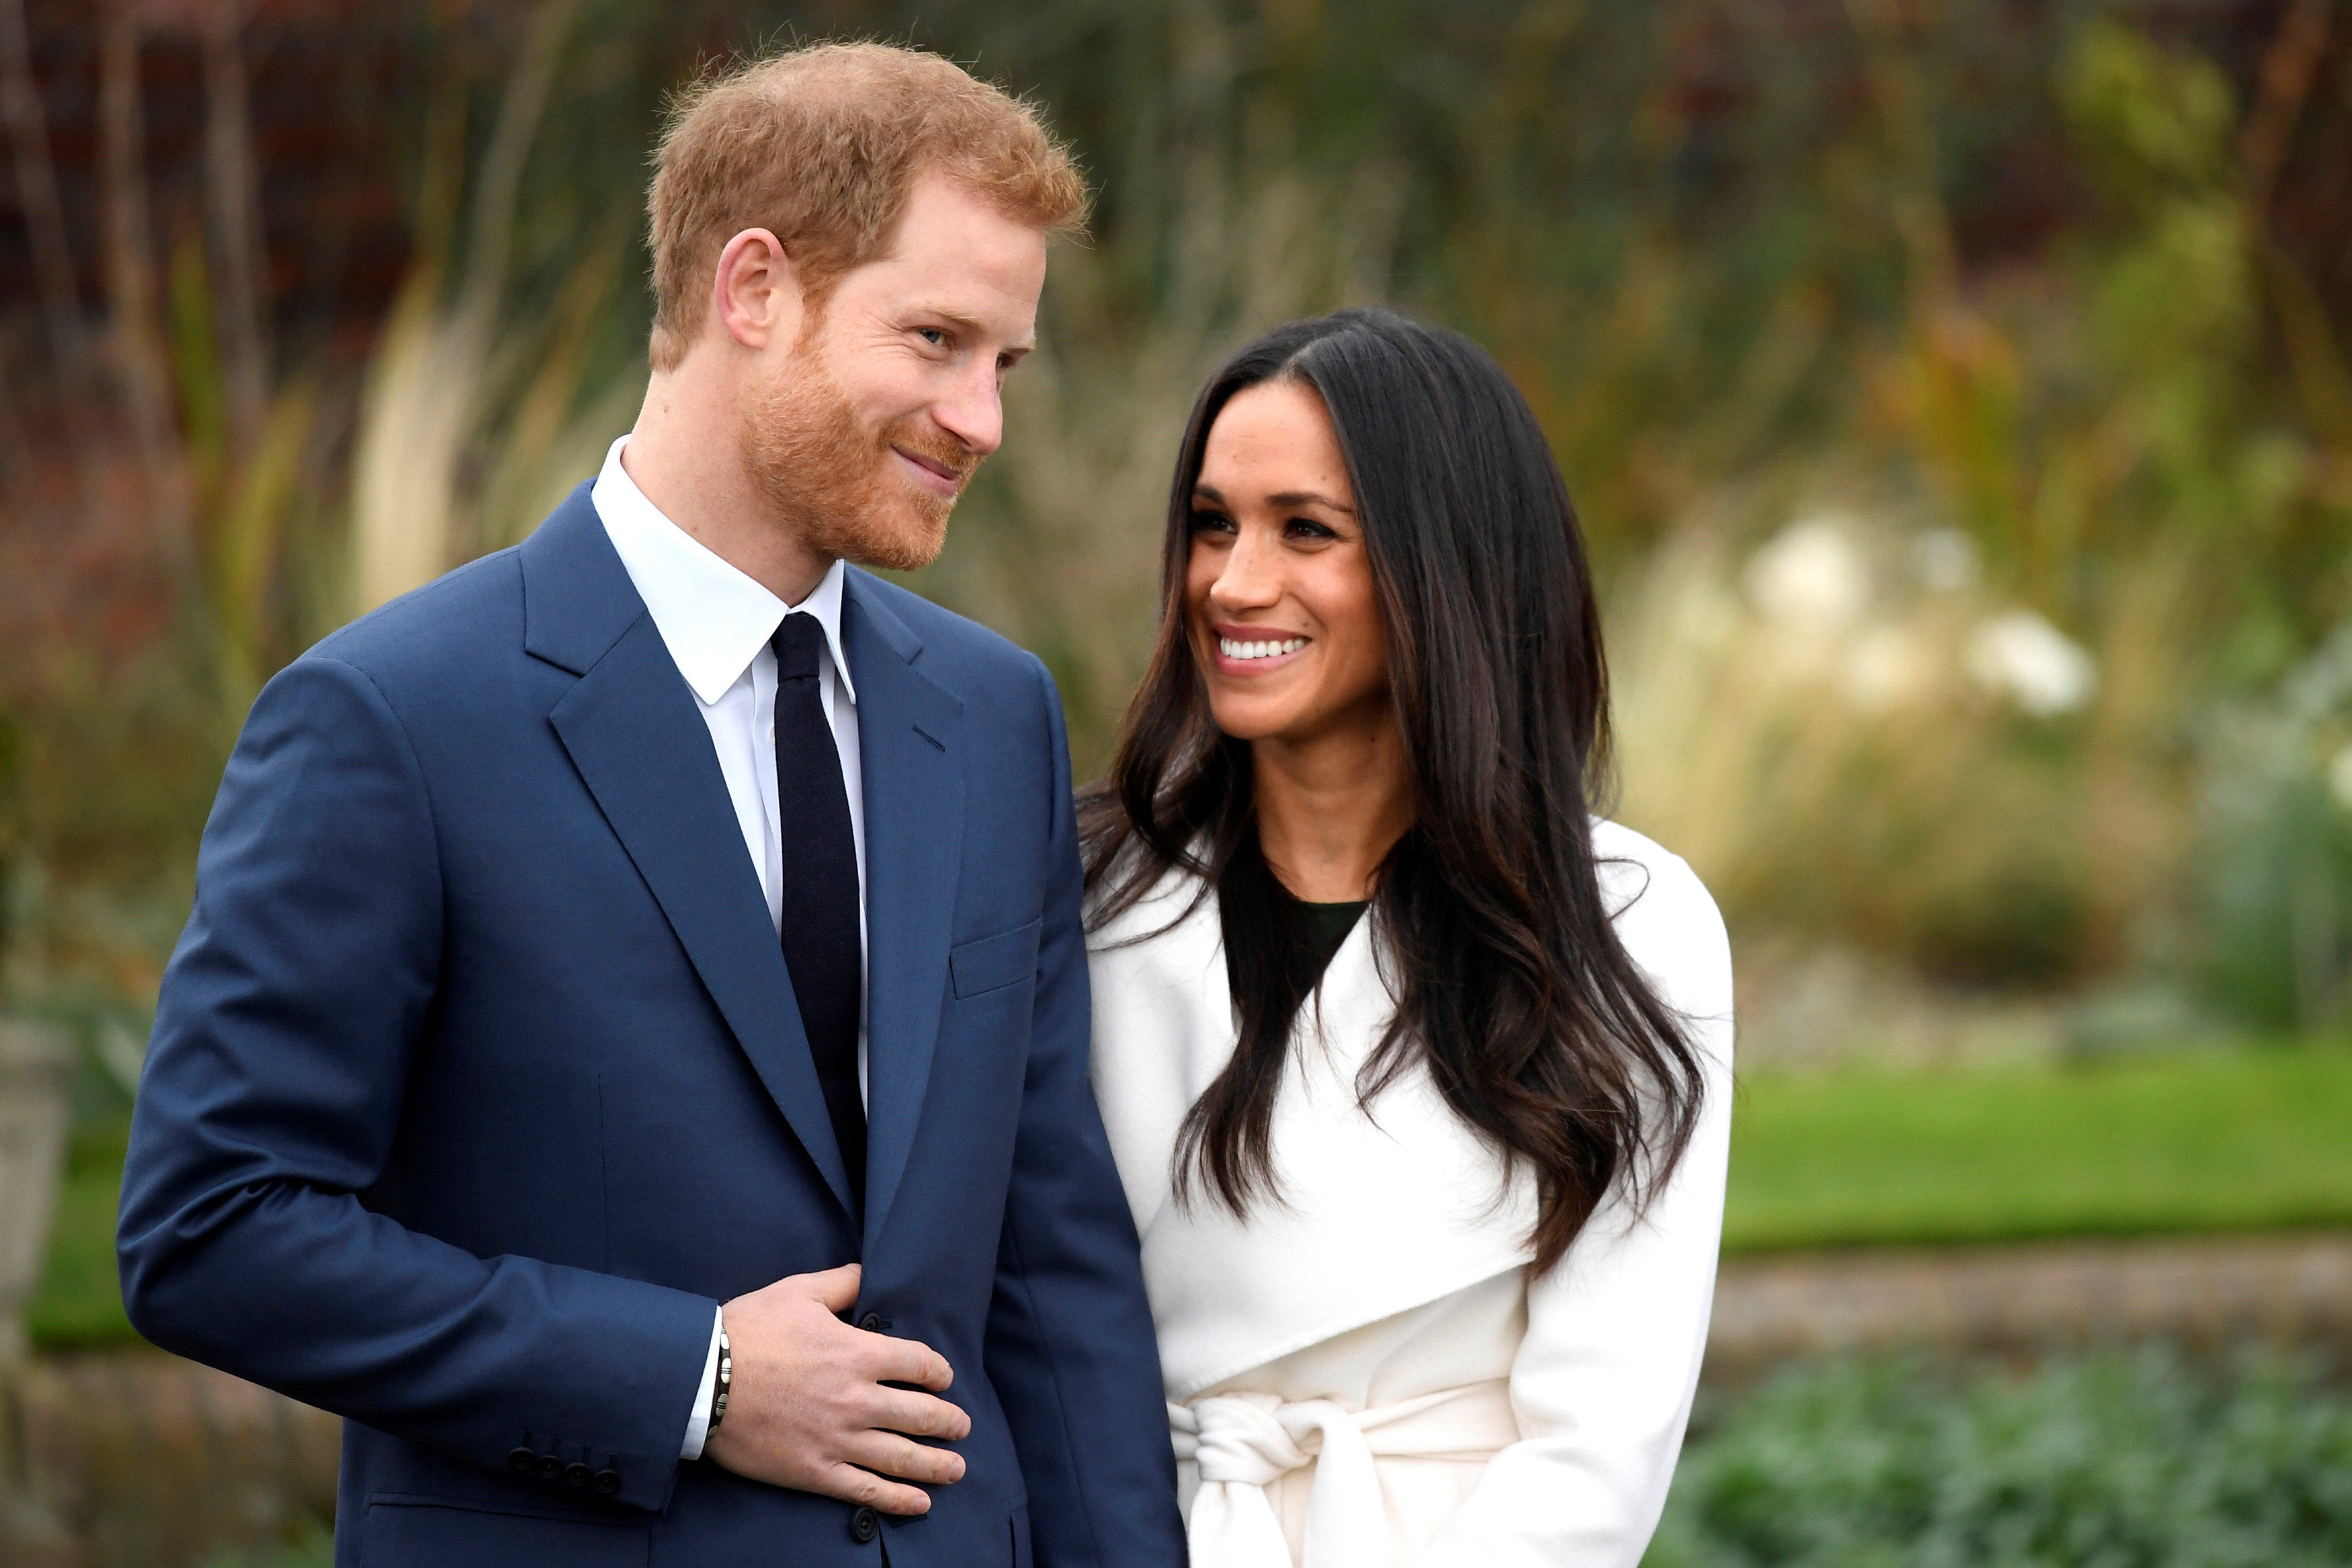 What is the significance of Prince Harry and Meghan Markle's